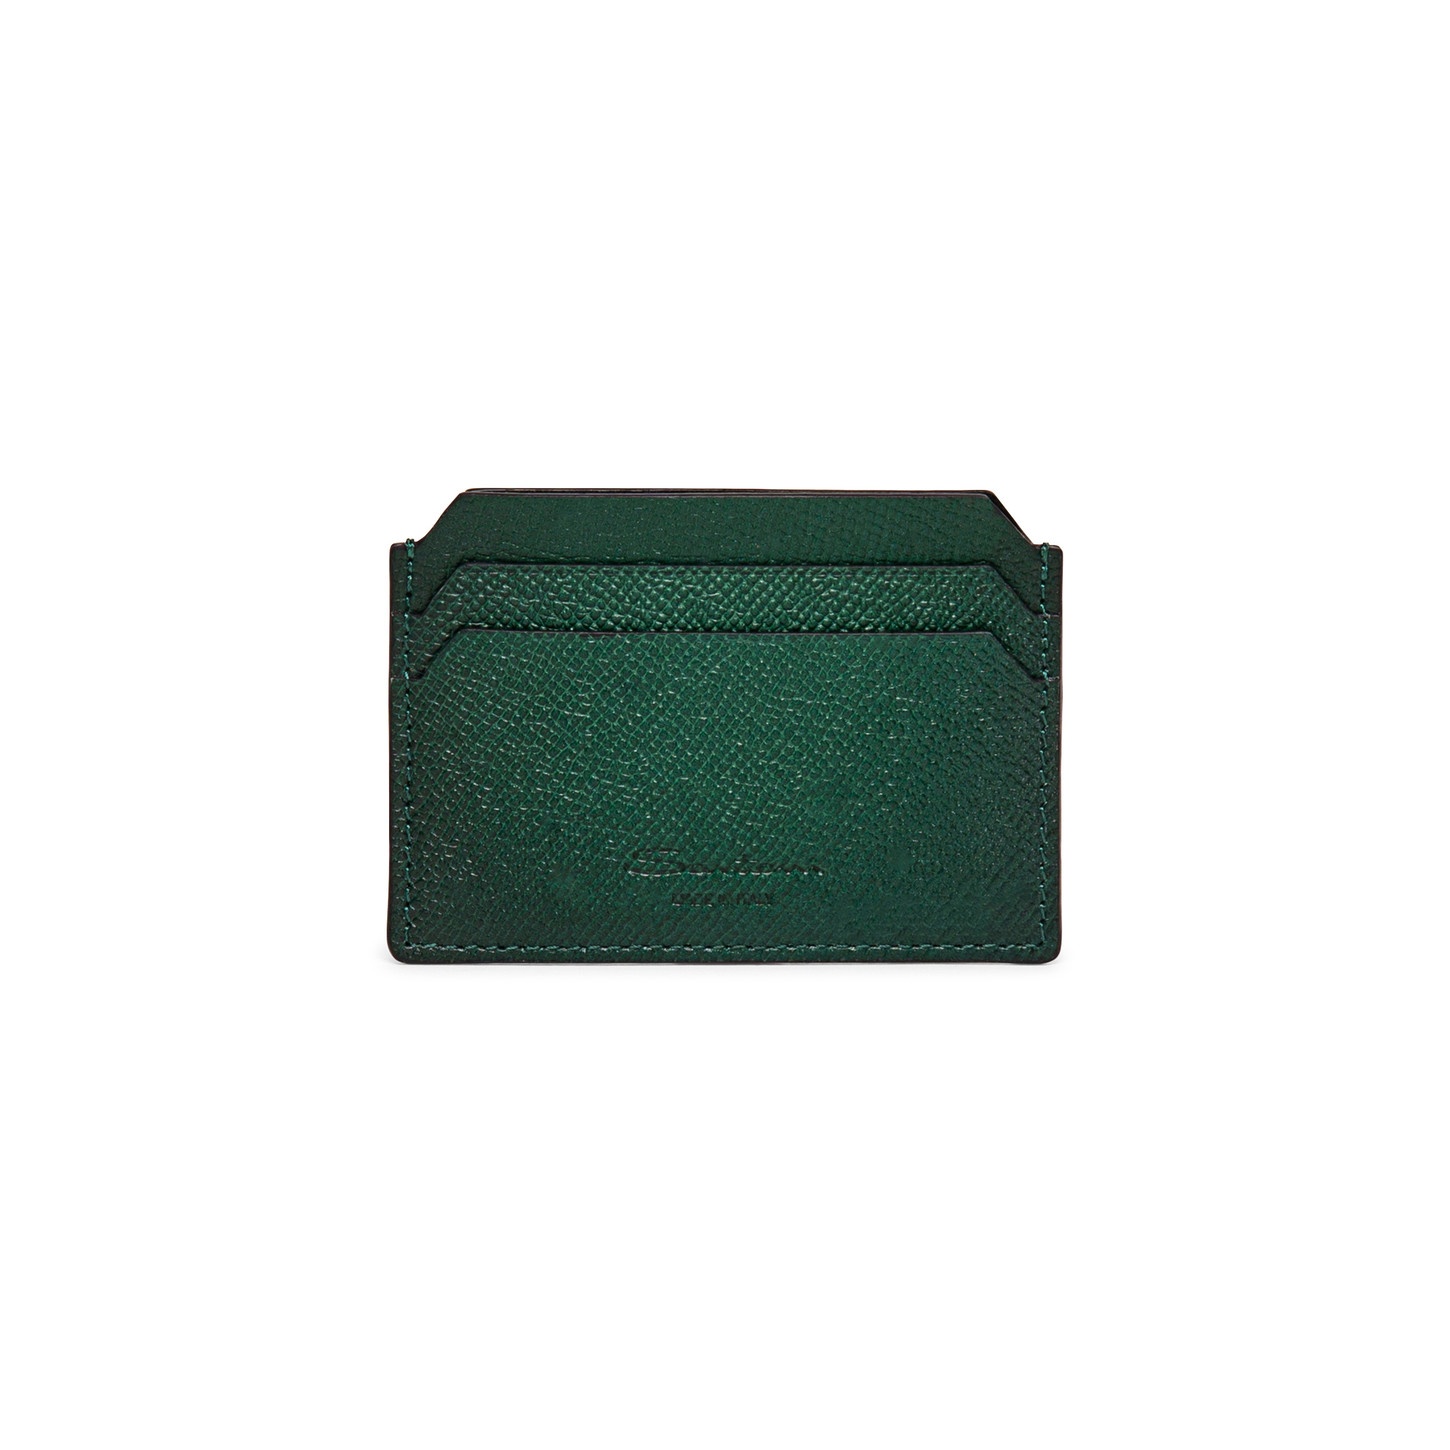 Green saffiano leather credit card holder - 1